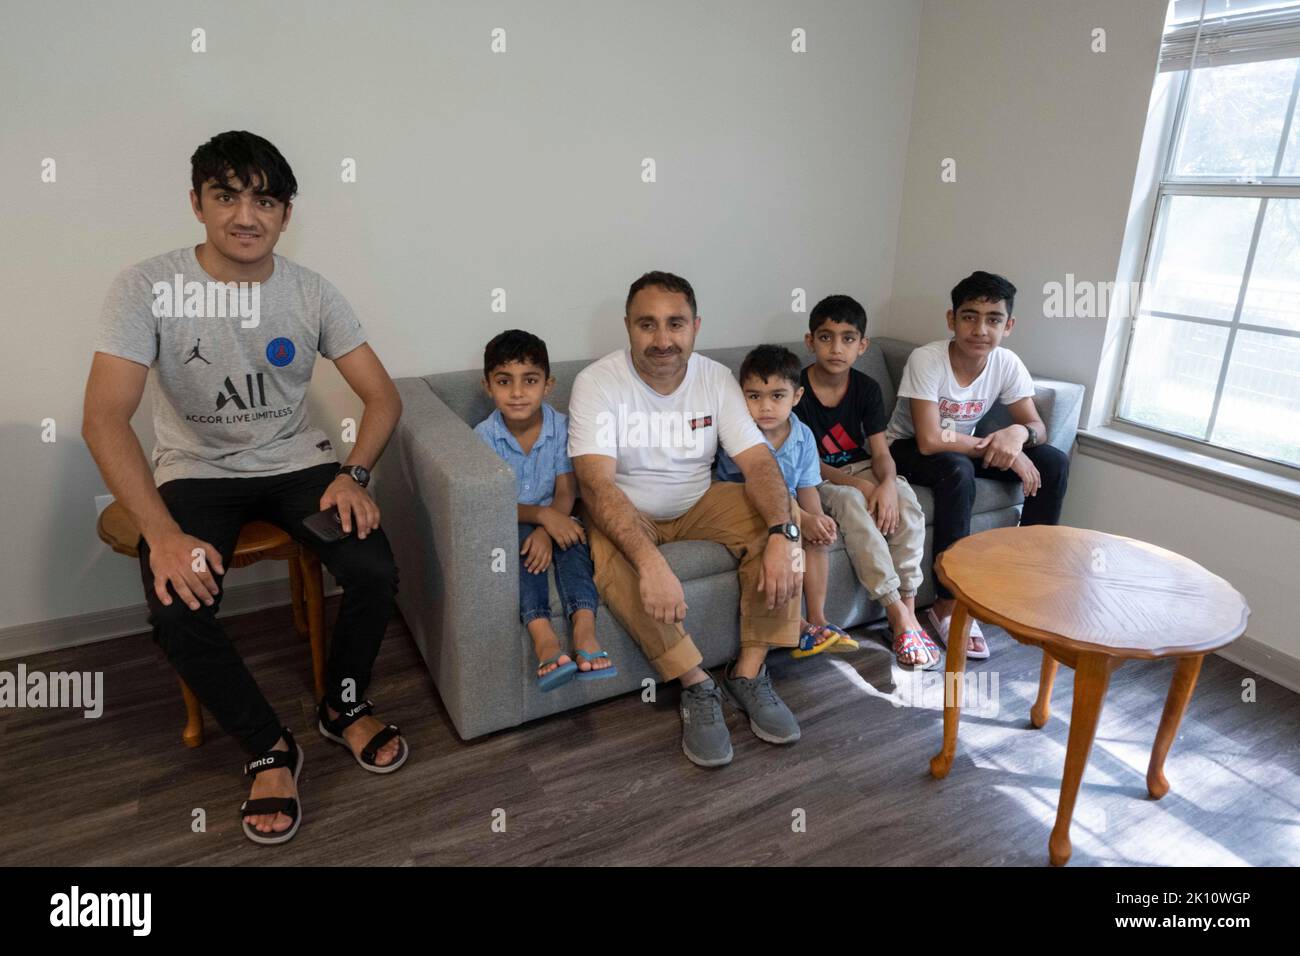 The male members of an Afghanistan refugee family pose for a picture after moving furniture into an apartment in north Austin, more than a year after they left their war-torn homeland in 2021. The family of ten spent 13 months in a Dubai refugee camp before being relocated to the U.S. via Turkey. ©Bob Daemmrich Stock Photo